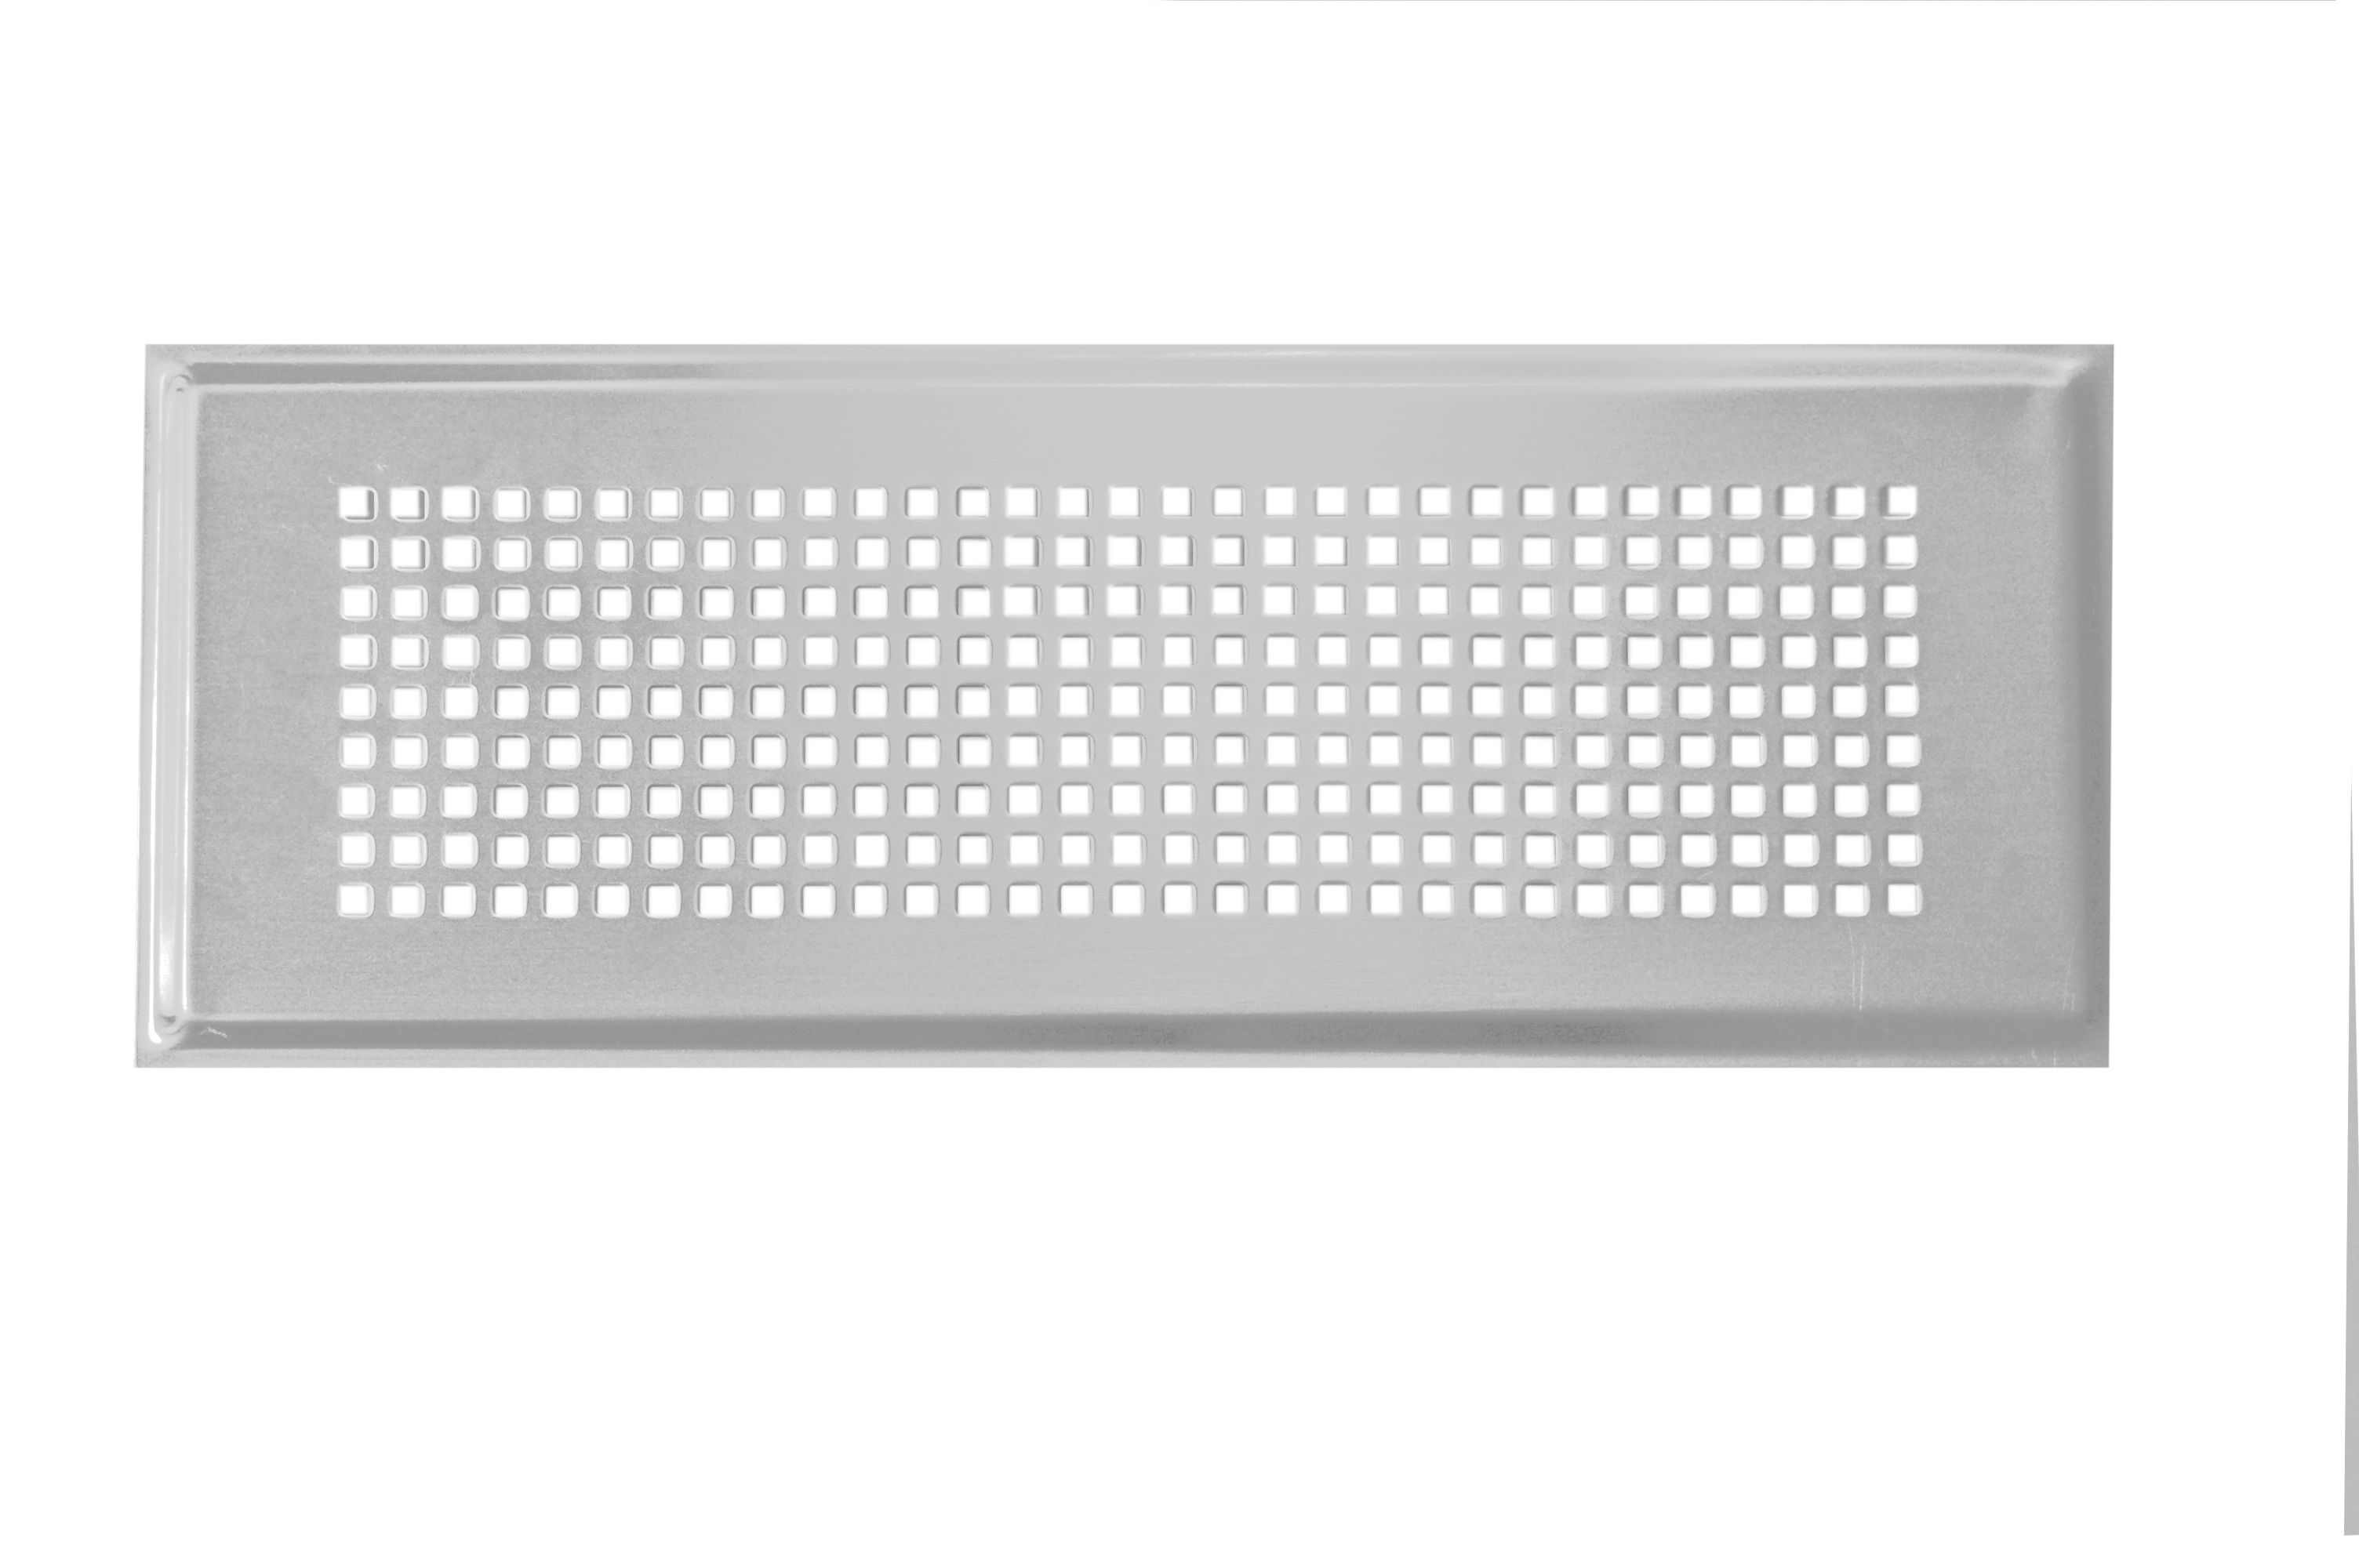 torino-stainless-steel-supply-and-extract-air-designer-grille-350-x-130